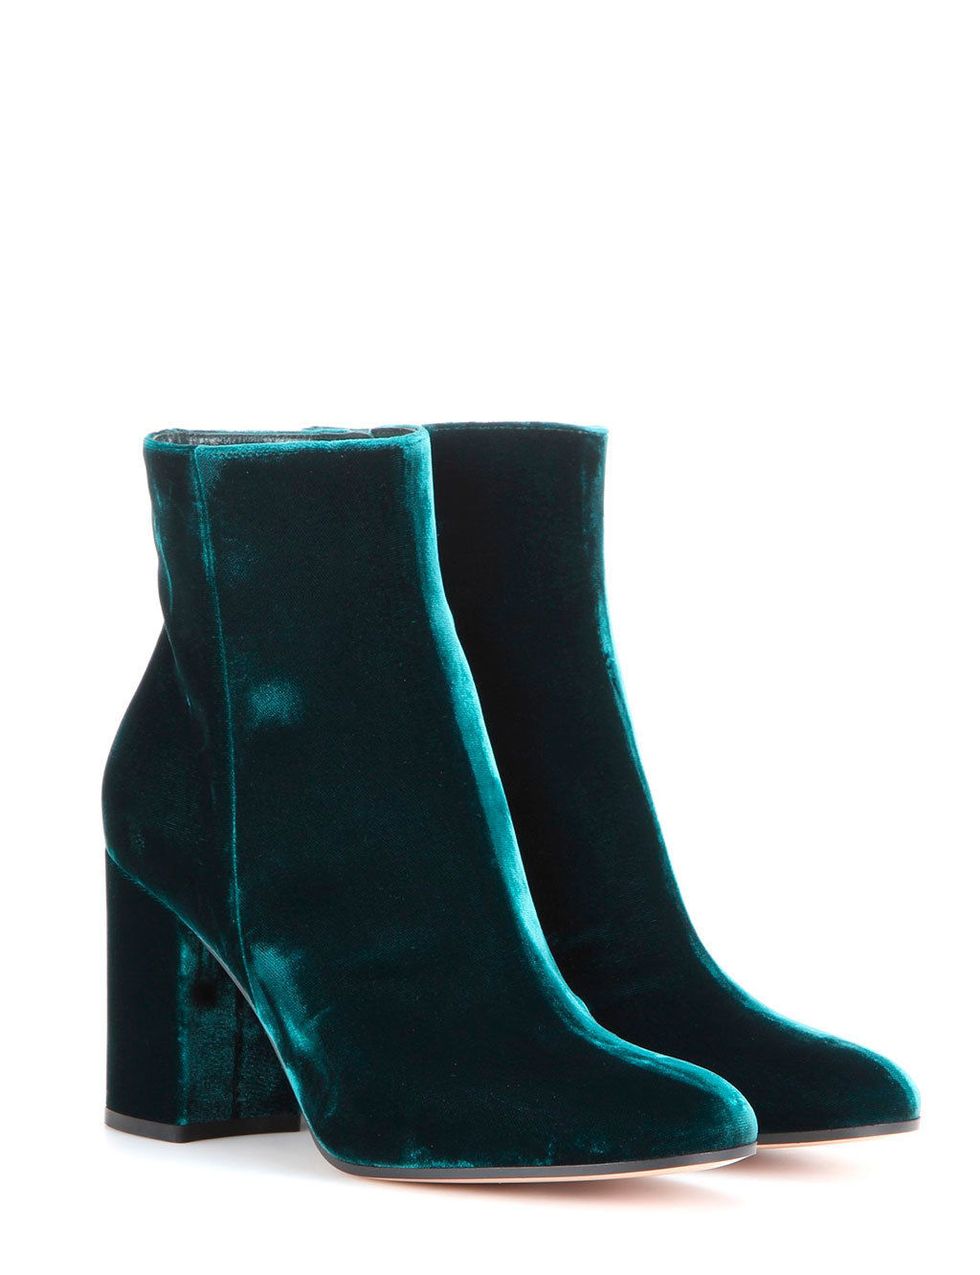 Boot, Teal, Aqua, Turquoise, Leather, Synthetic rubber, 